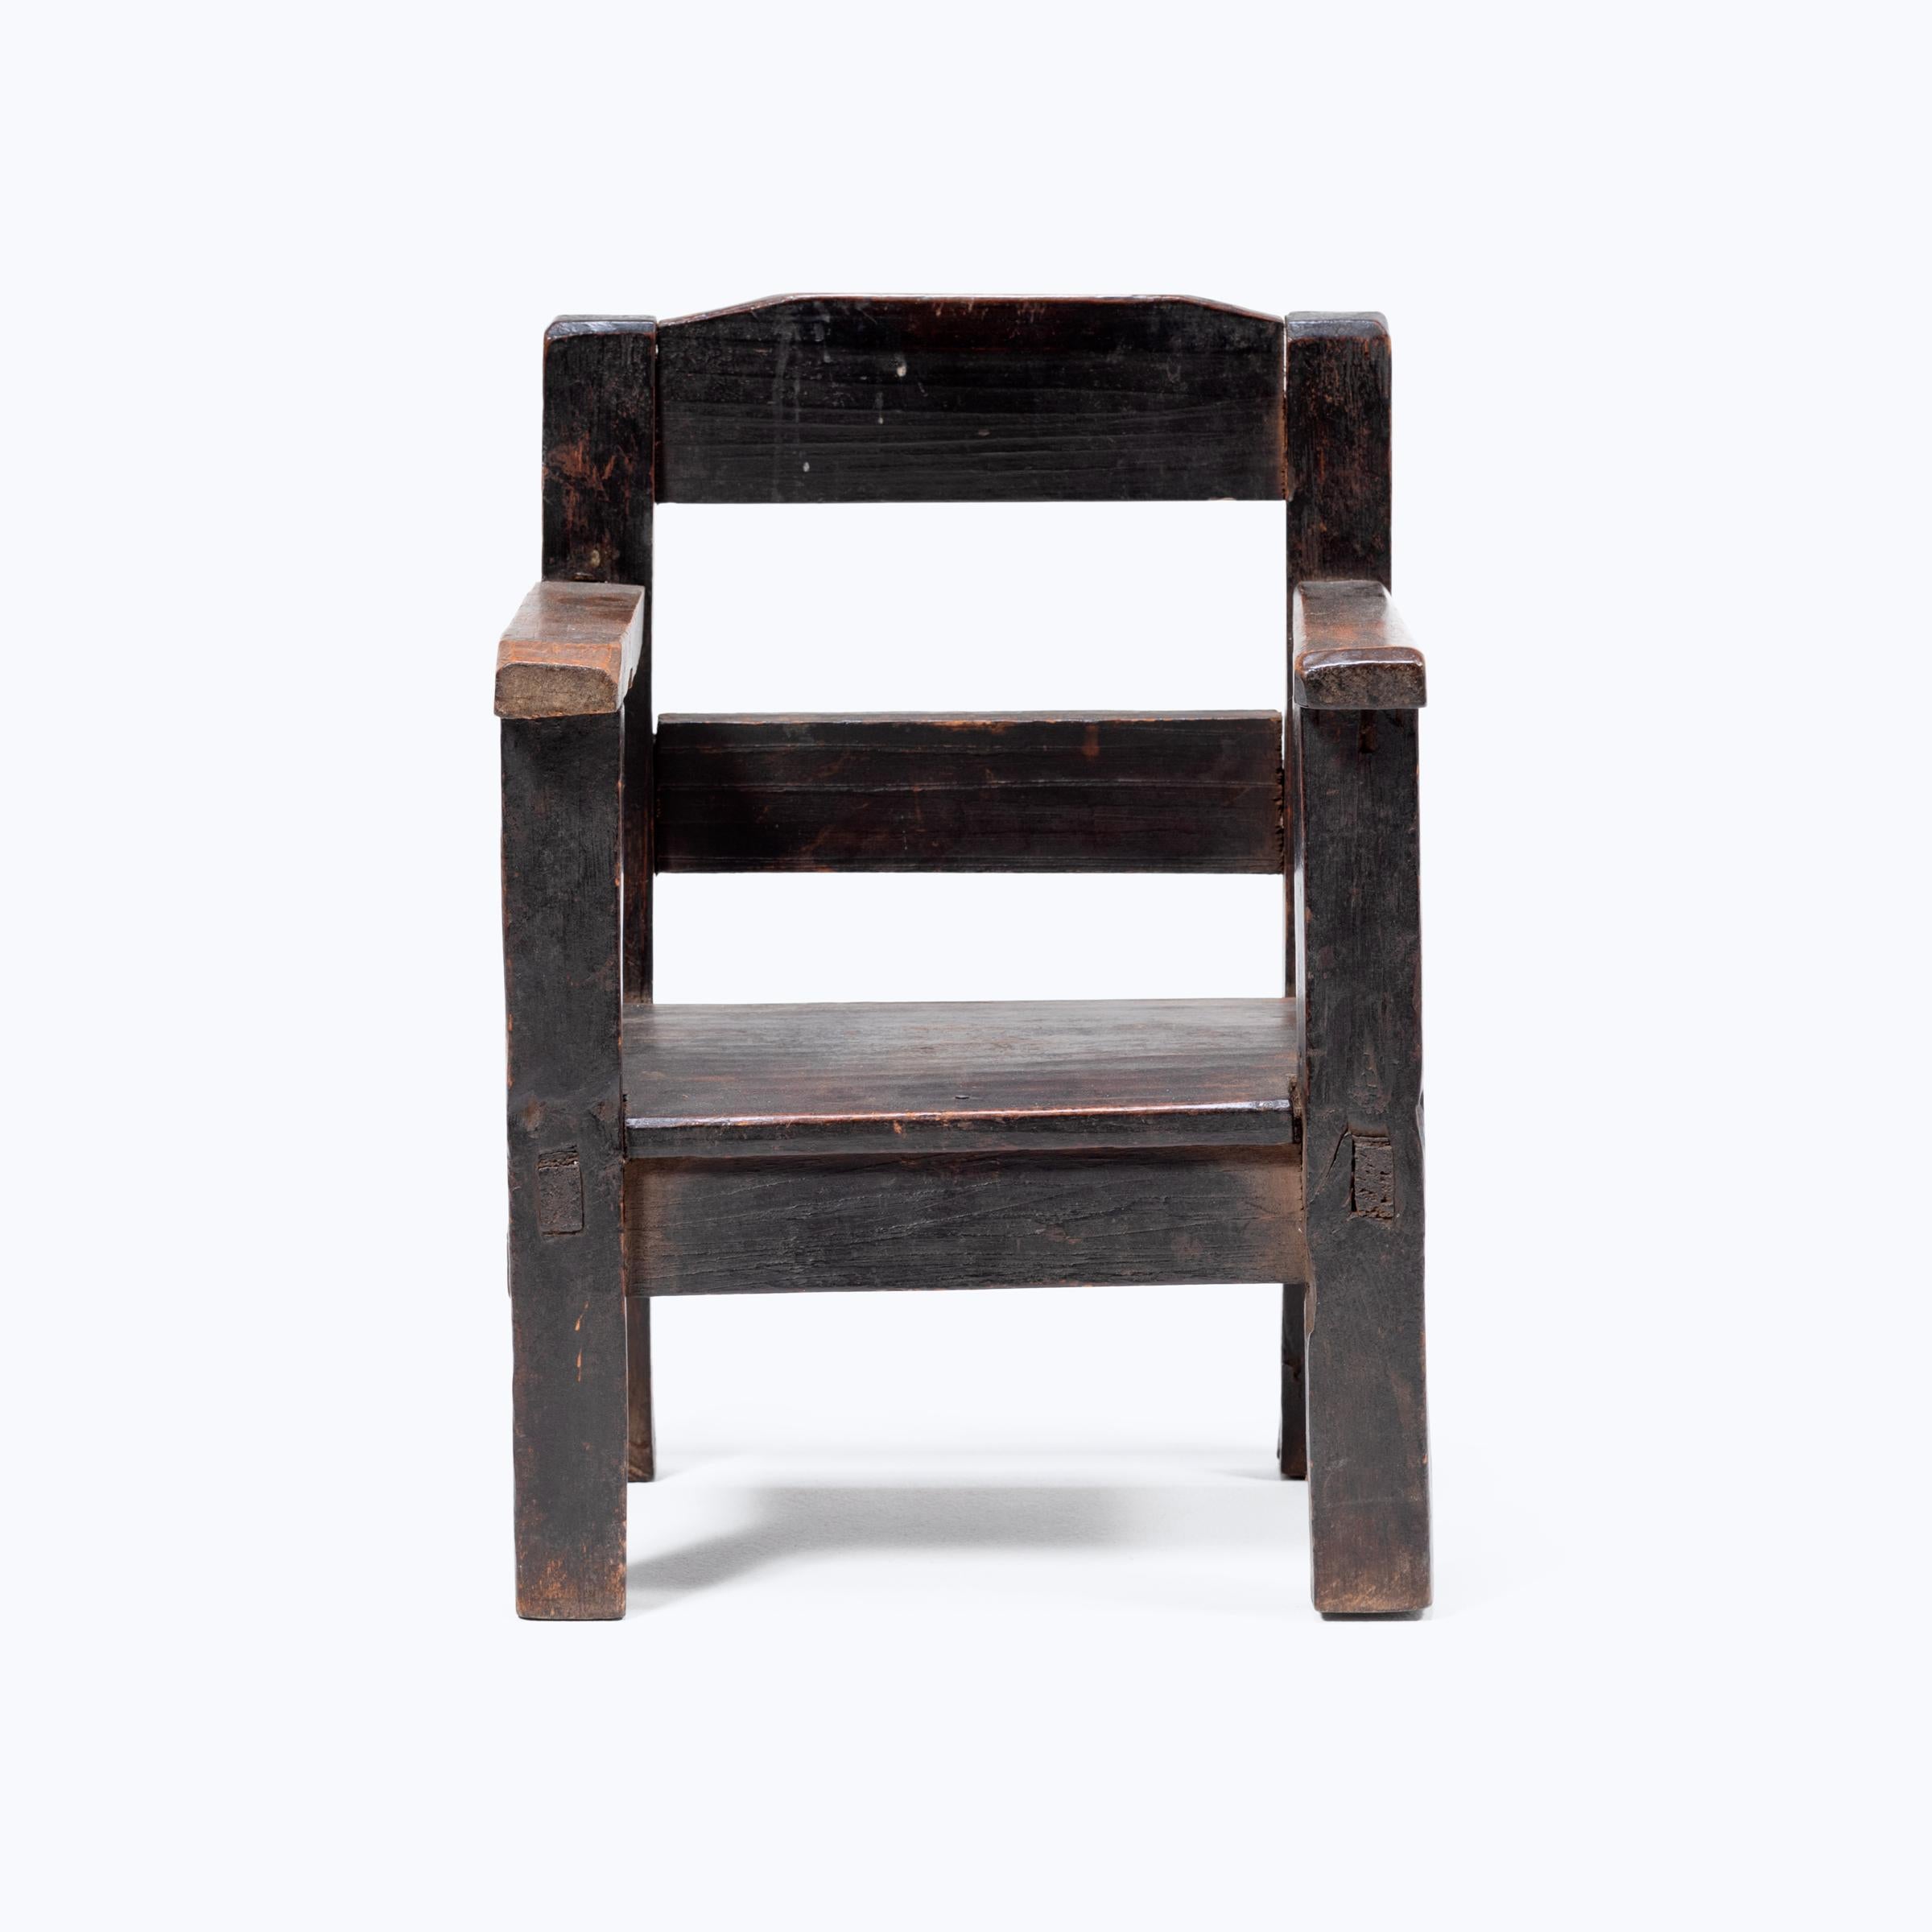 Crafted in the early 20th century, this petite Guatemalan children's chair charms with its playful asymmetry and richly textured surface. Influenced by Spanish Colonial furniture design, the chair has a slatted back and square seat framed by two